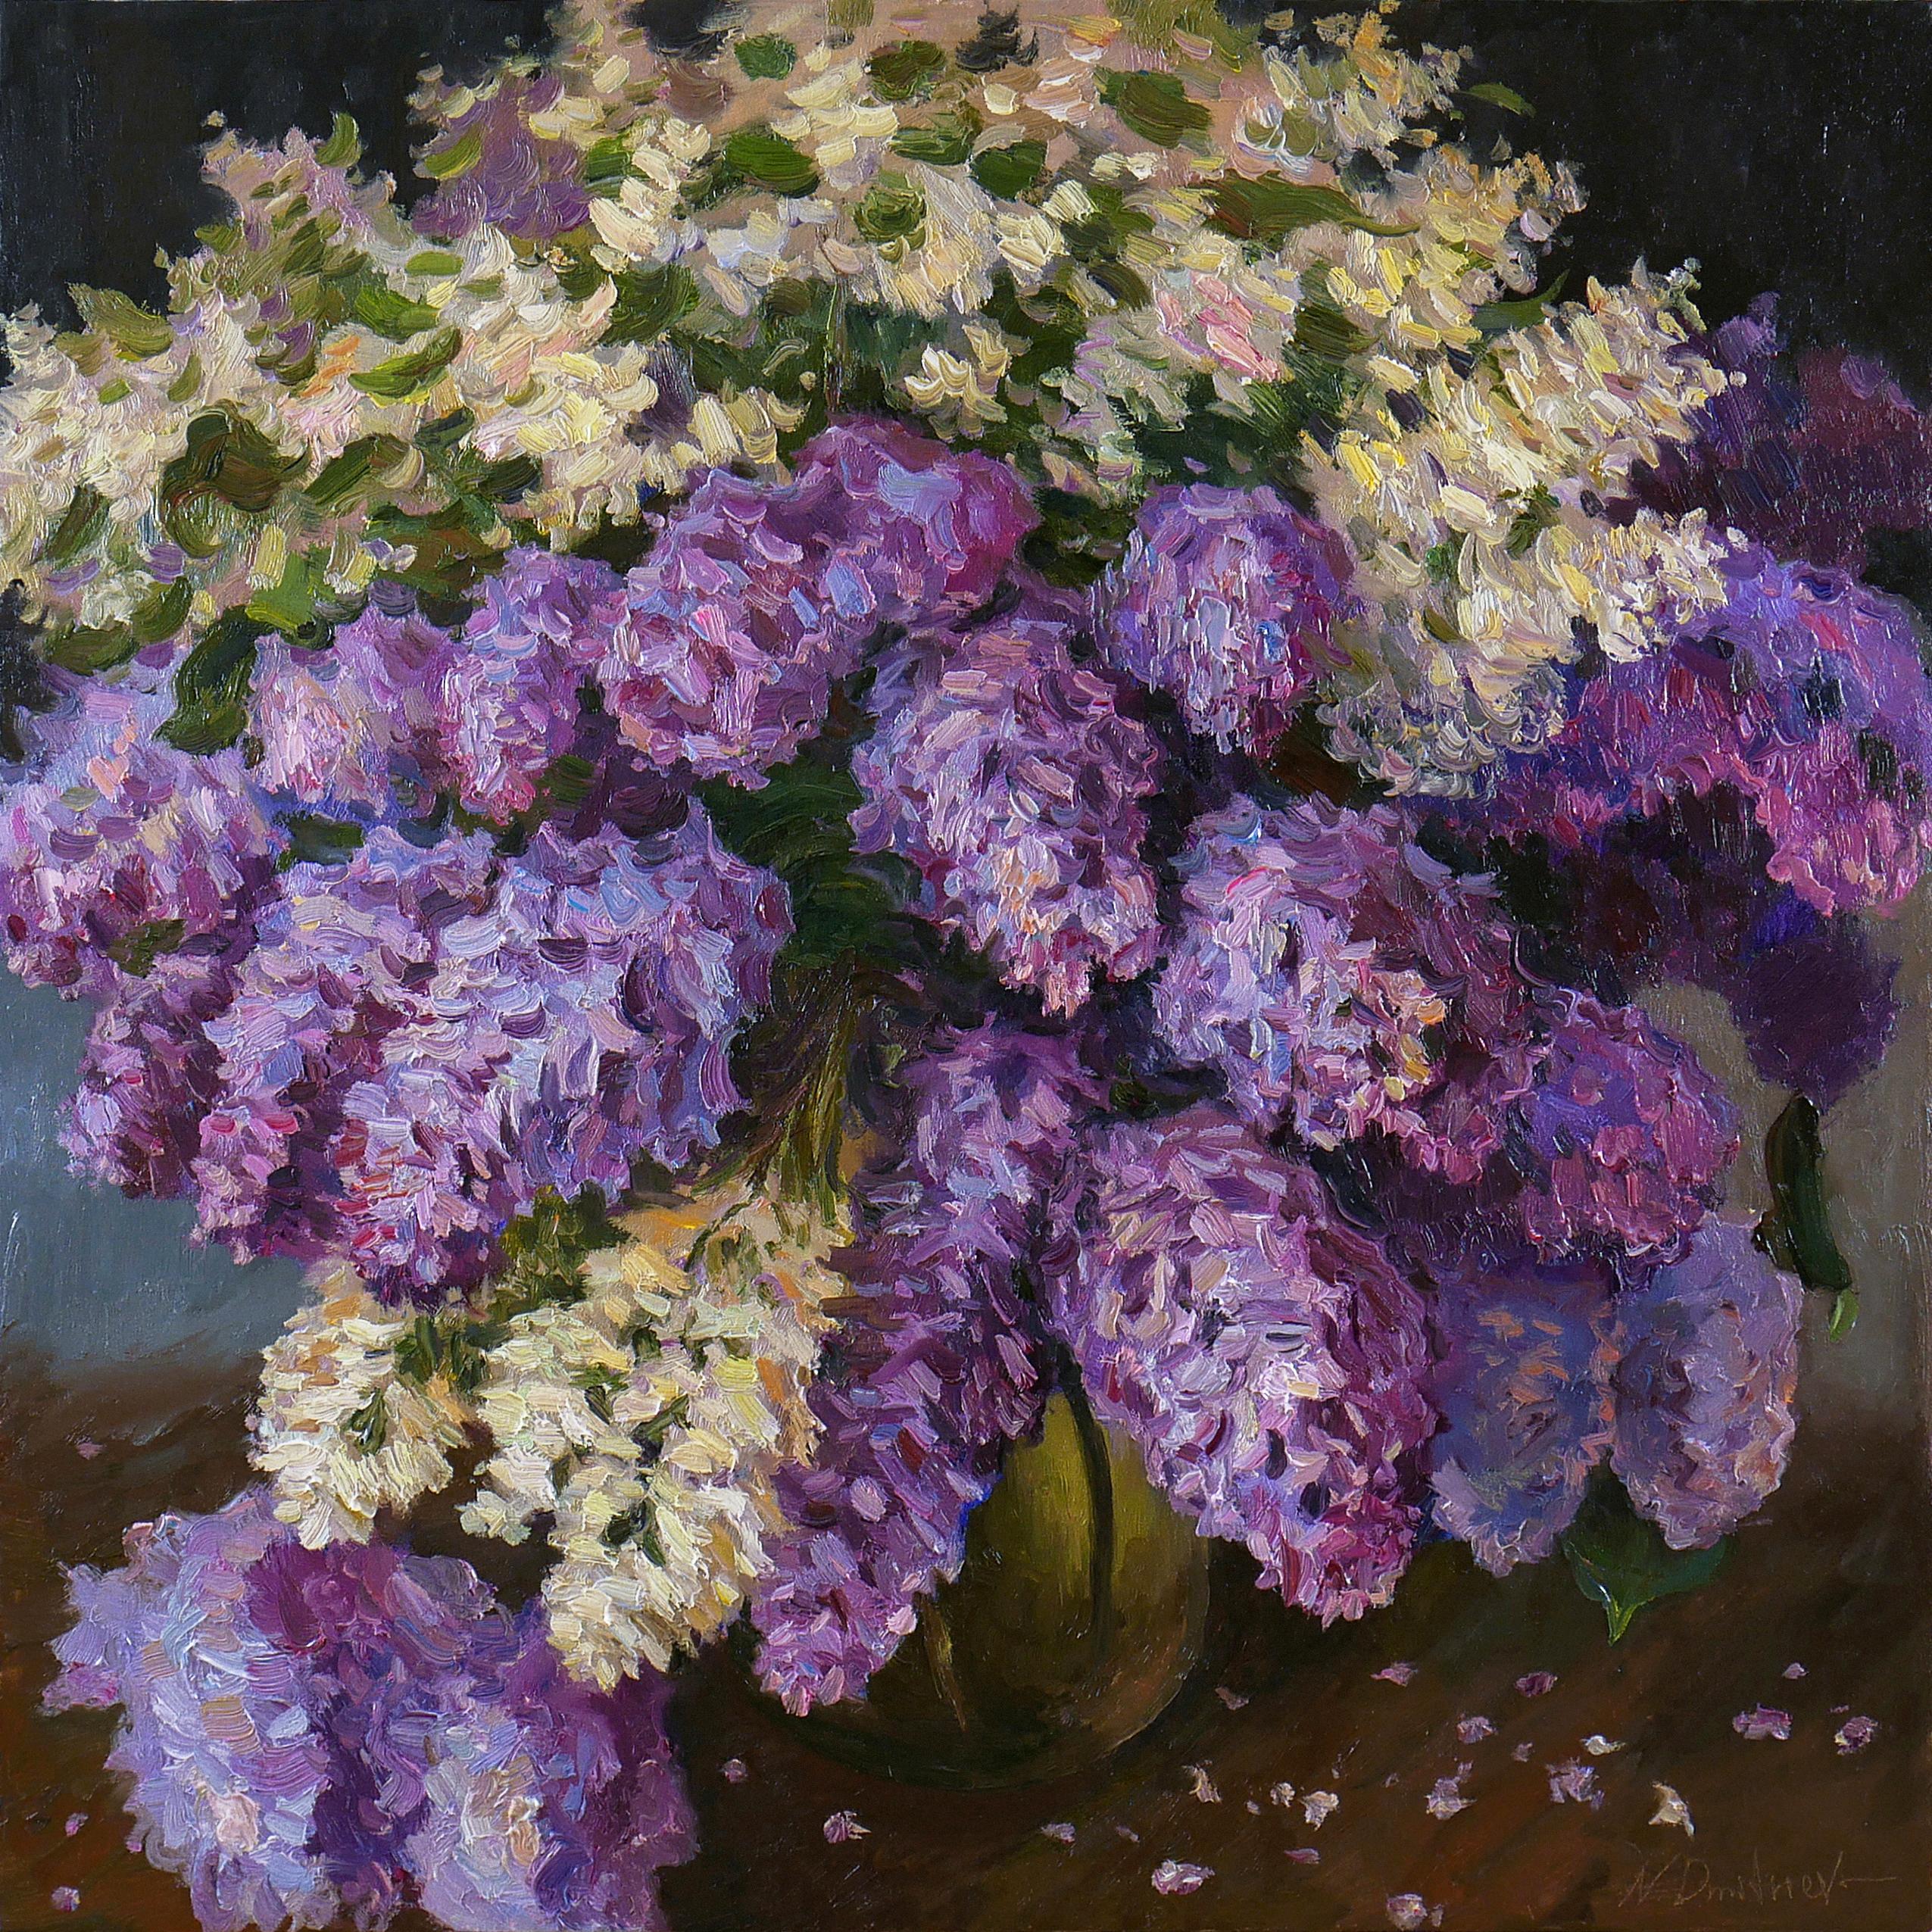 Nikolay Dmitriev Interior Painting - The Bouquet Of Aromatic Lilacs - lilacs still life painting